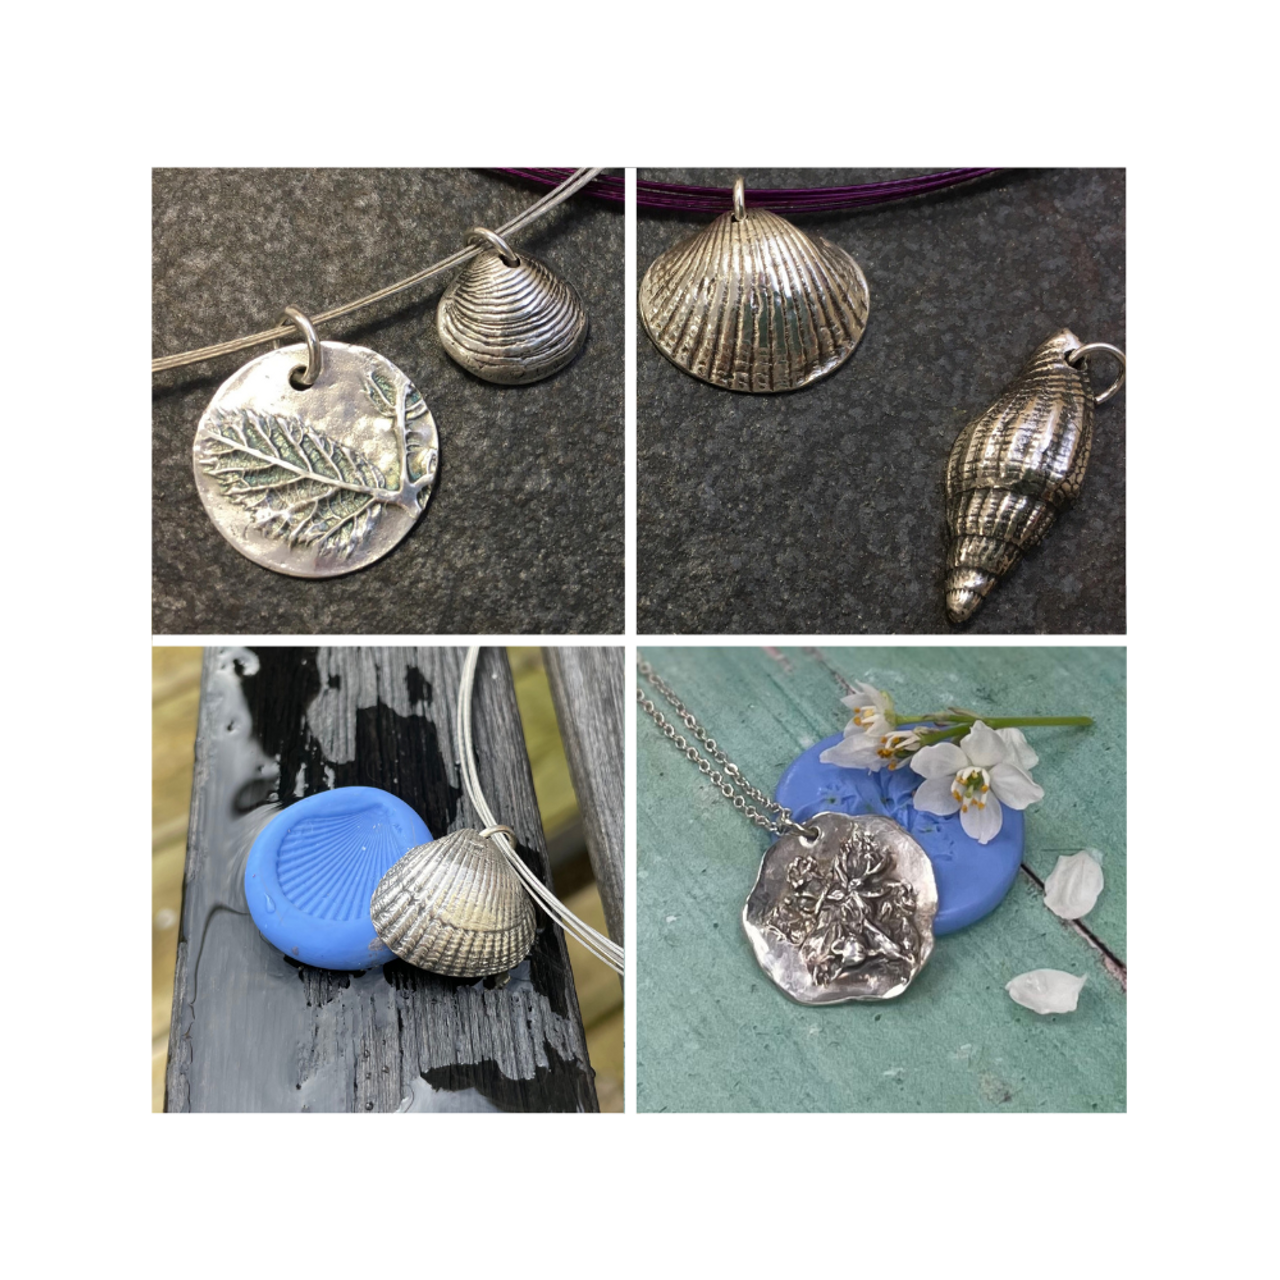 Art Clay silver jewellery - nature casts moulded into silver